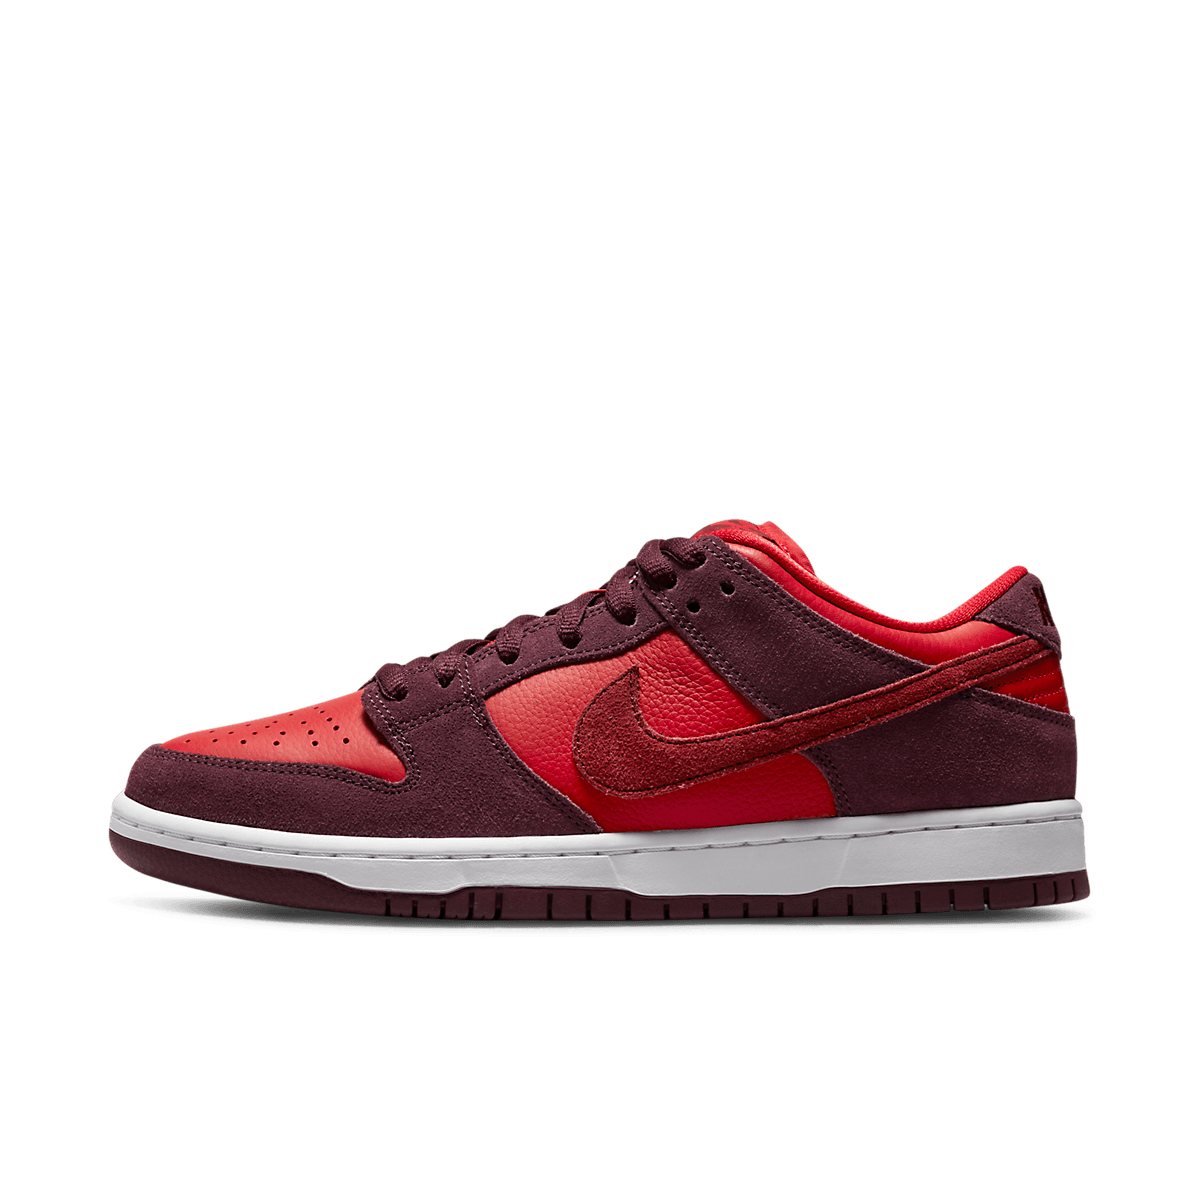 Nike SB Dunk Low 'Cherry' - Fruity Pack